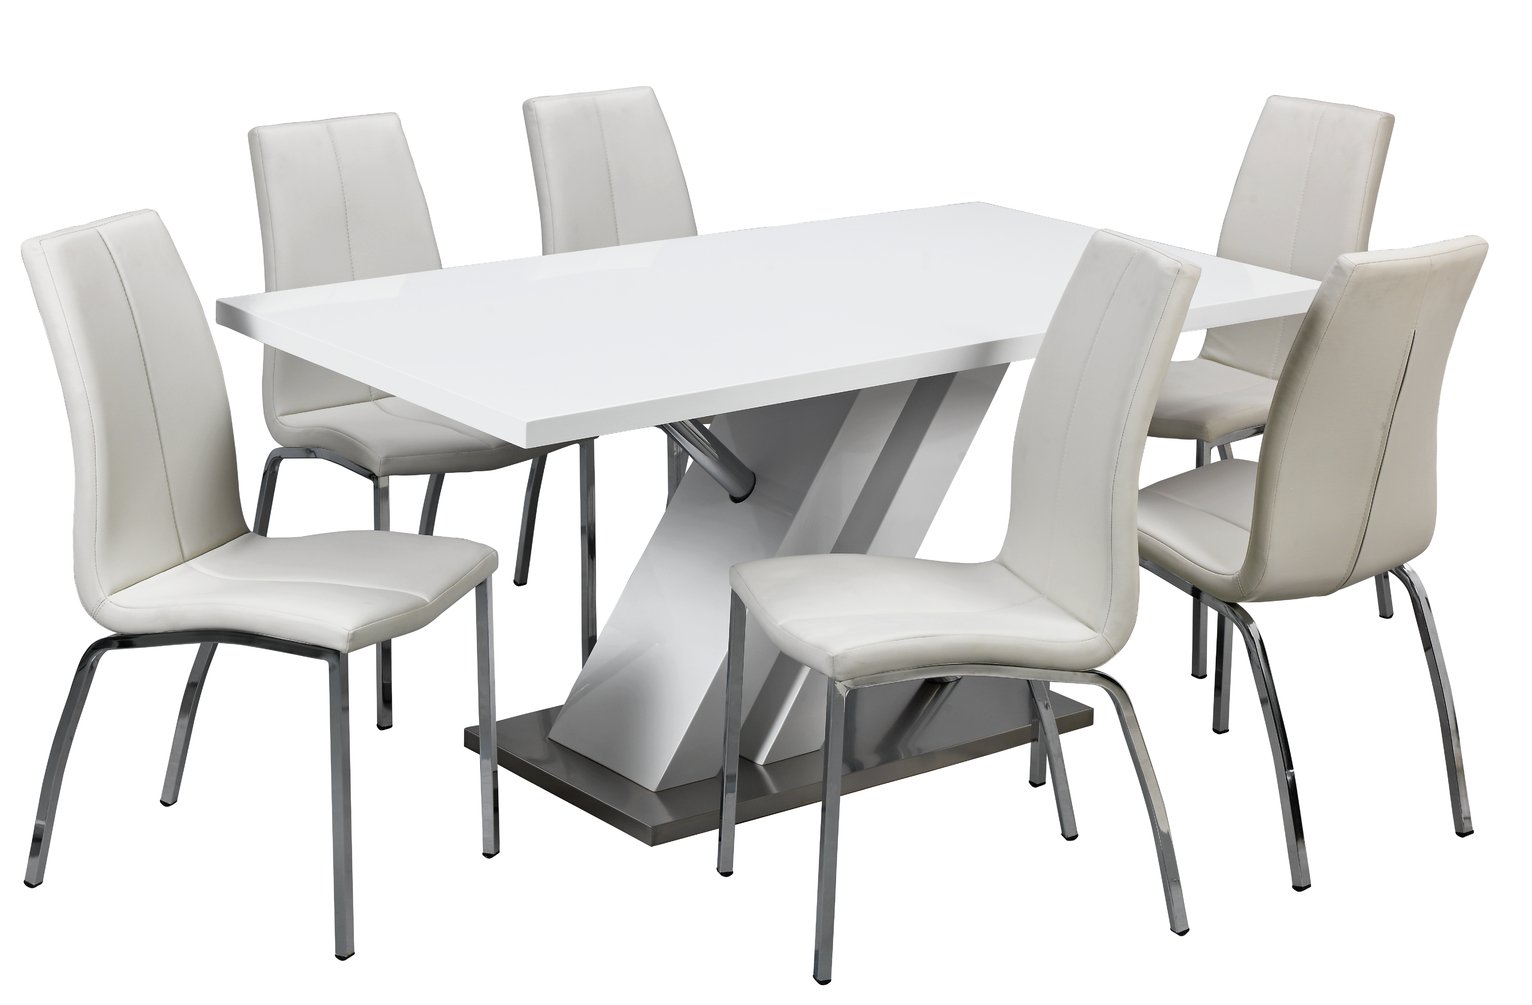 Argos Home Belvoir White Gloss Dining Table & 6 White Chairs